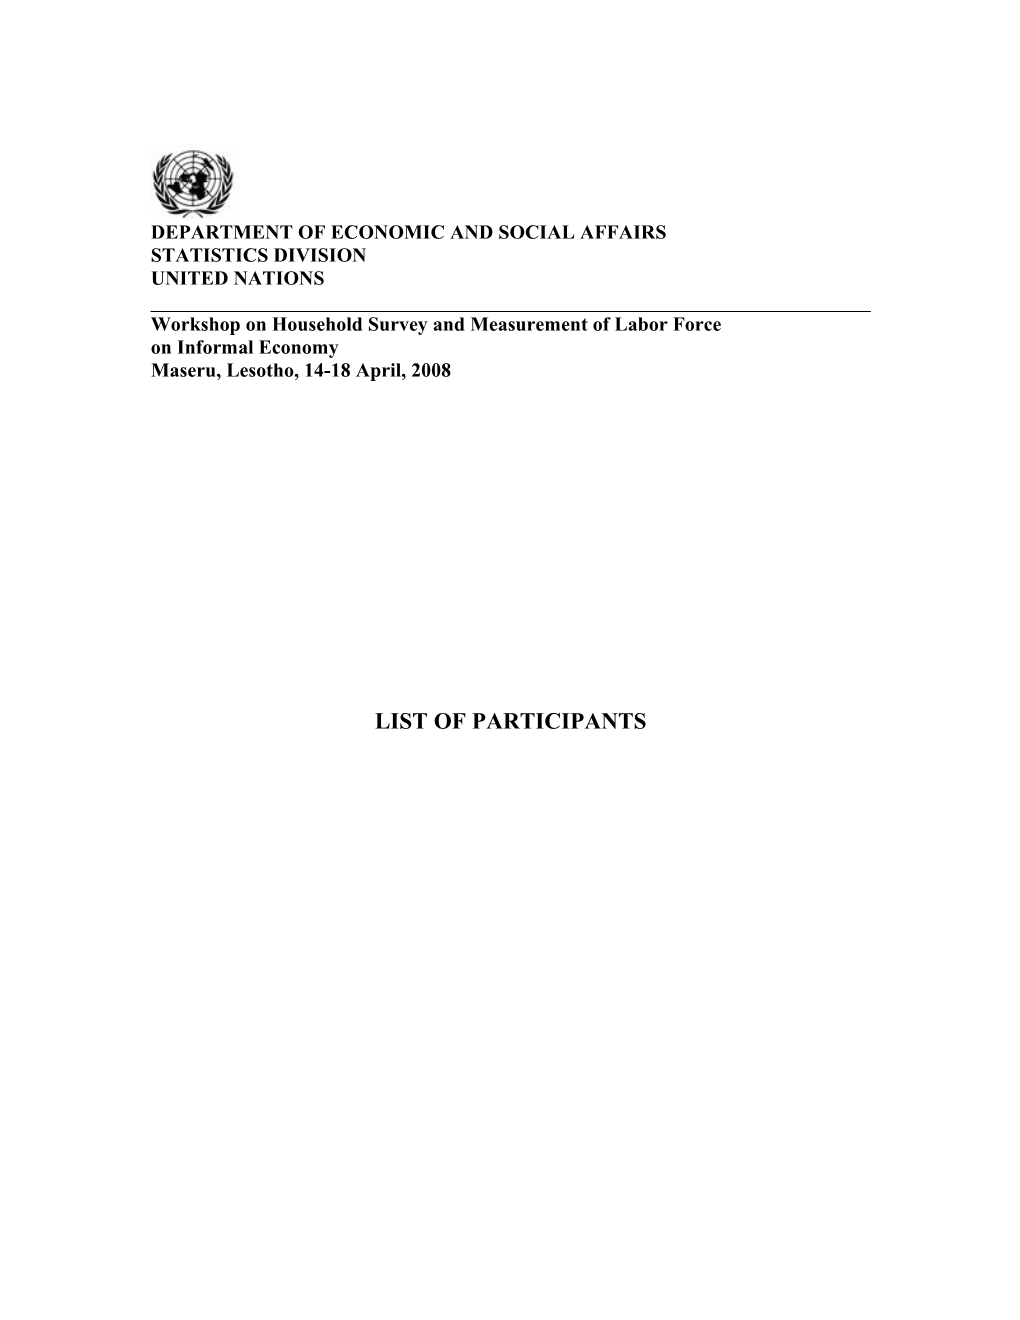 The United Nations Expert Group on Industrial Statistics